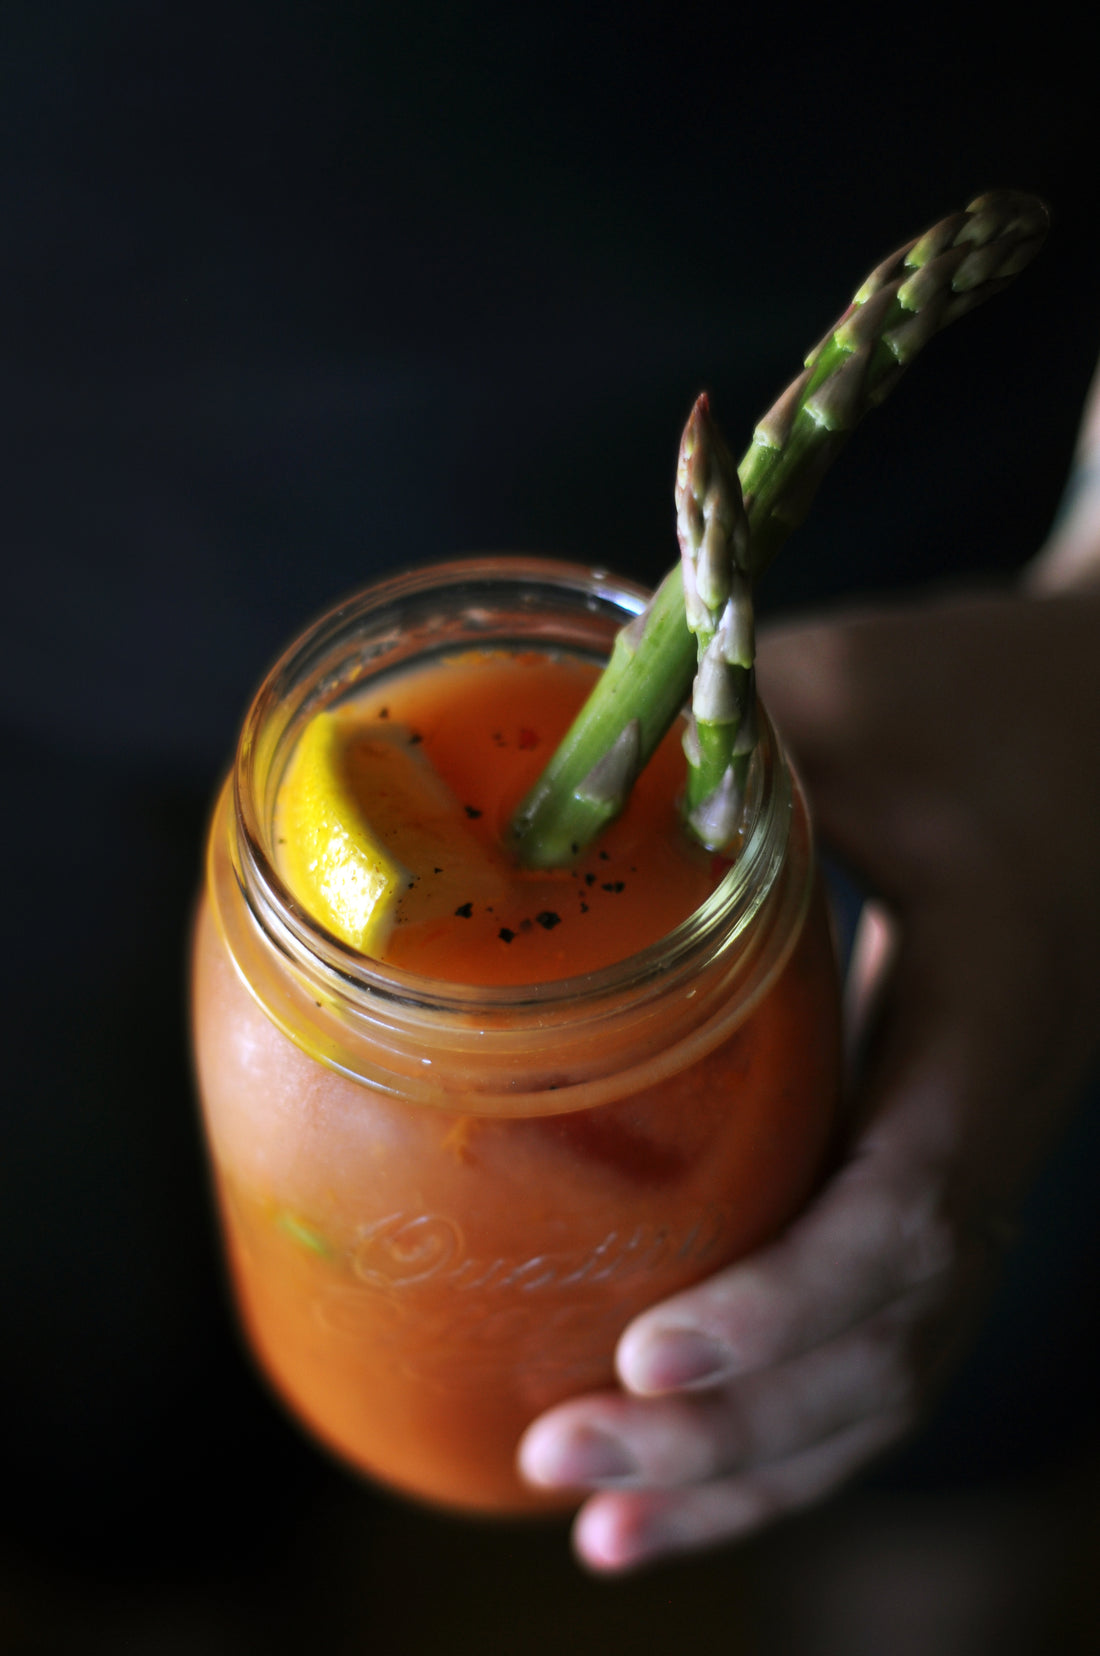 Hany's Harvest Wild Mary Recipe served in Mason jar, garnished with Asparagus and lemon.